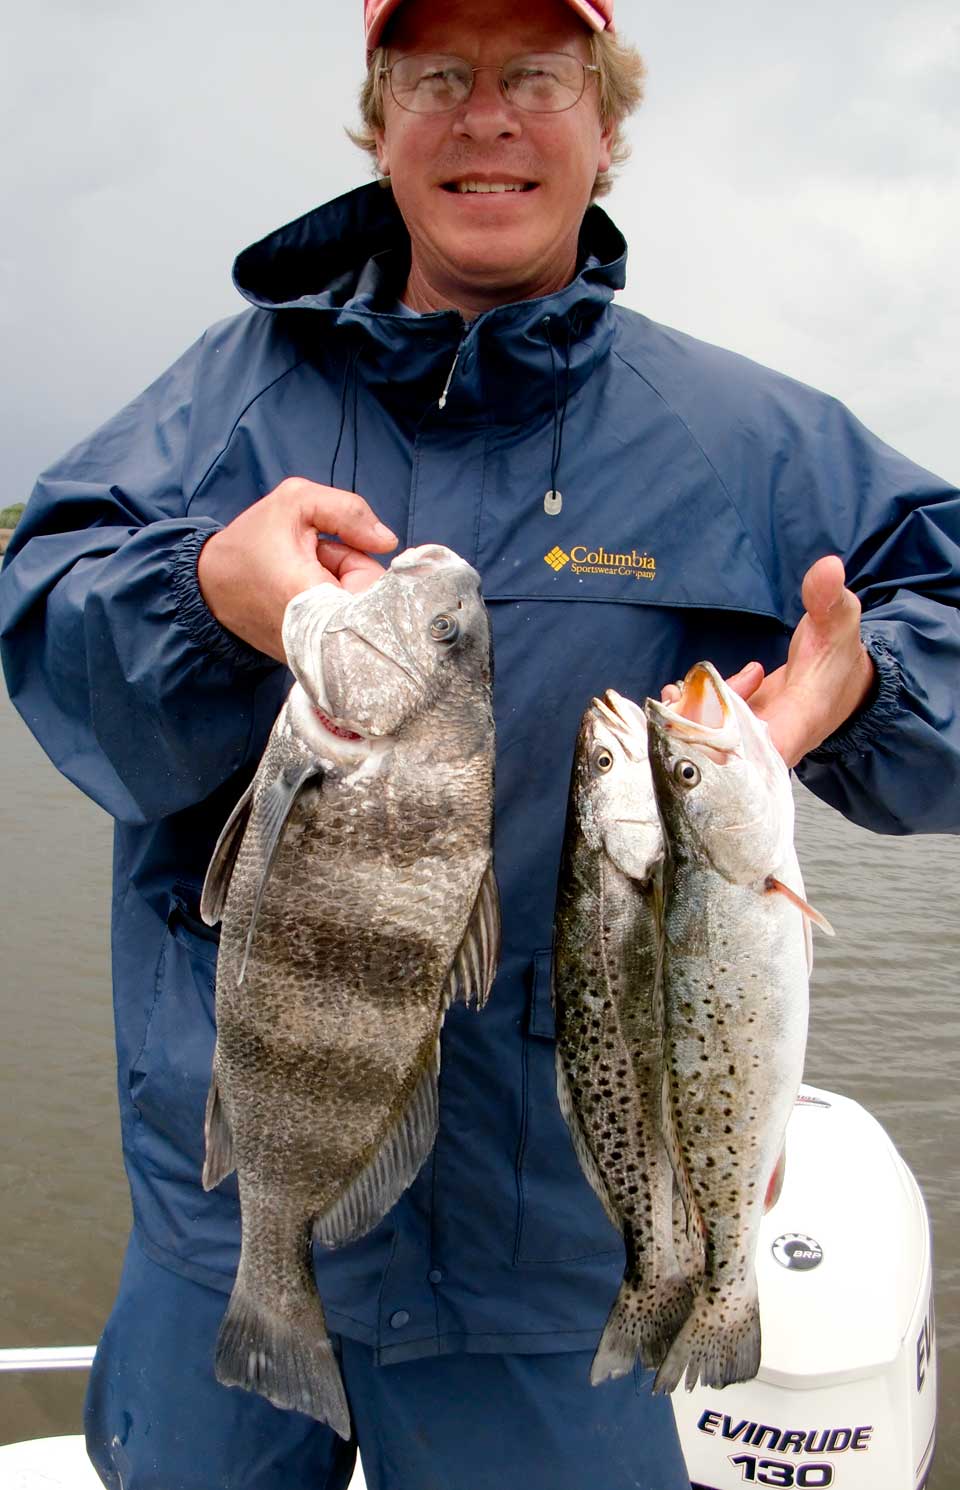 Black drum and Spotted seatrout